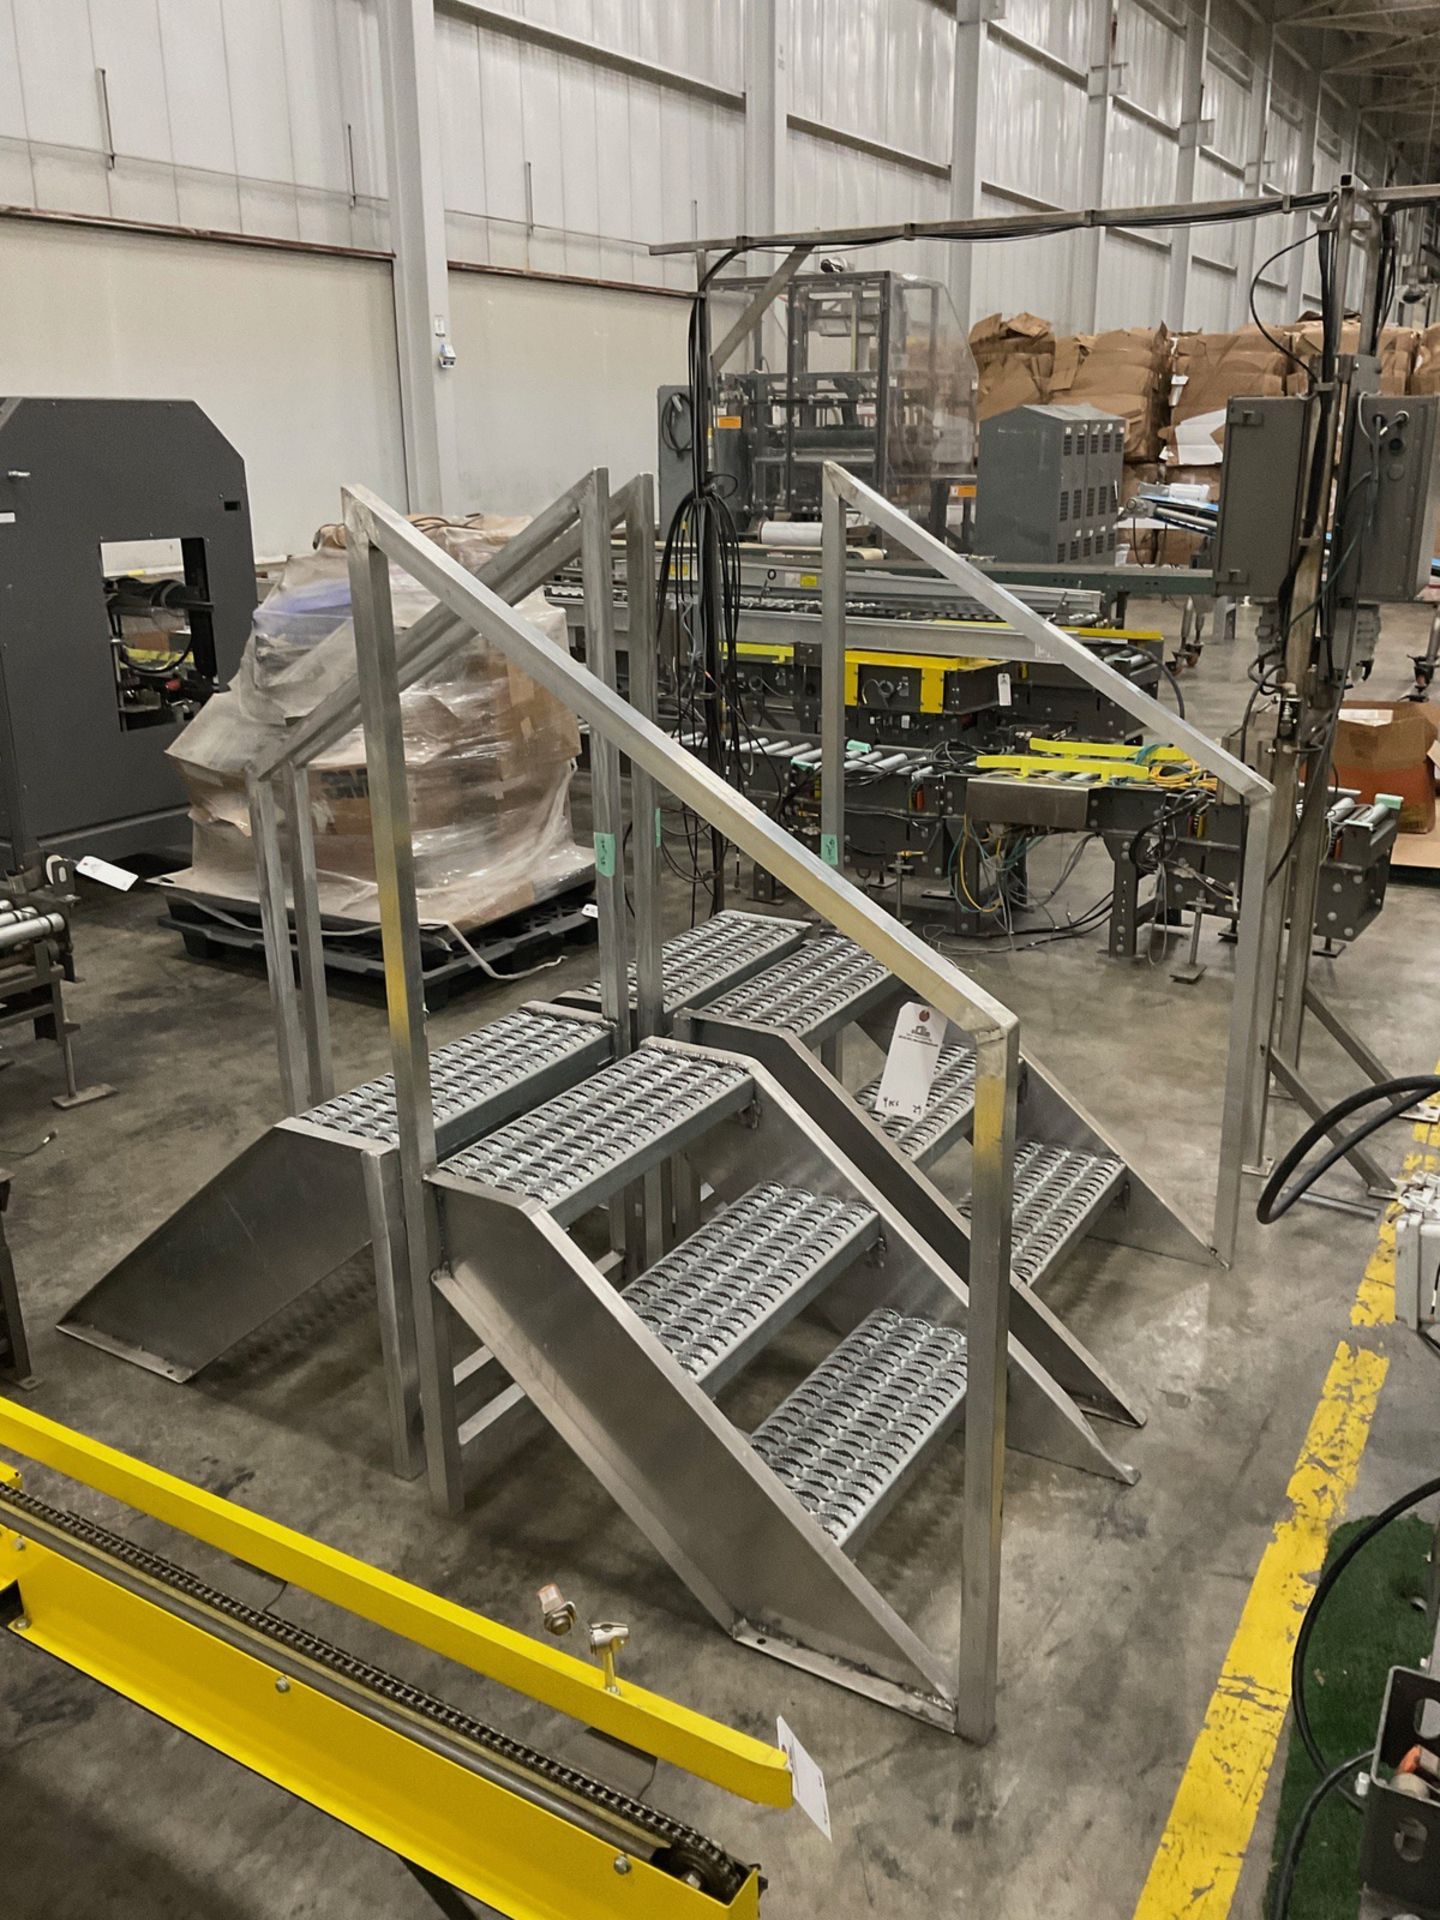 (4) Sets of Aluminum/Galvanized Stairs for Bag in Box Conveyor System Rig Fee: $75